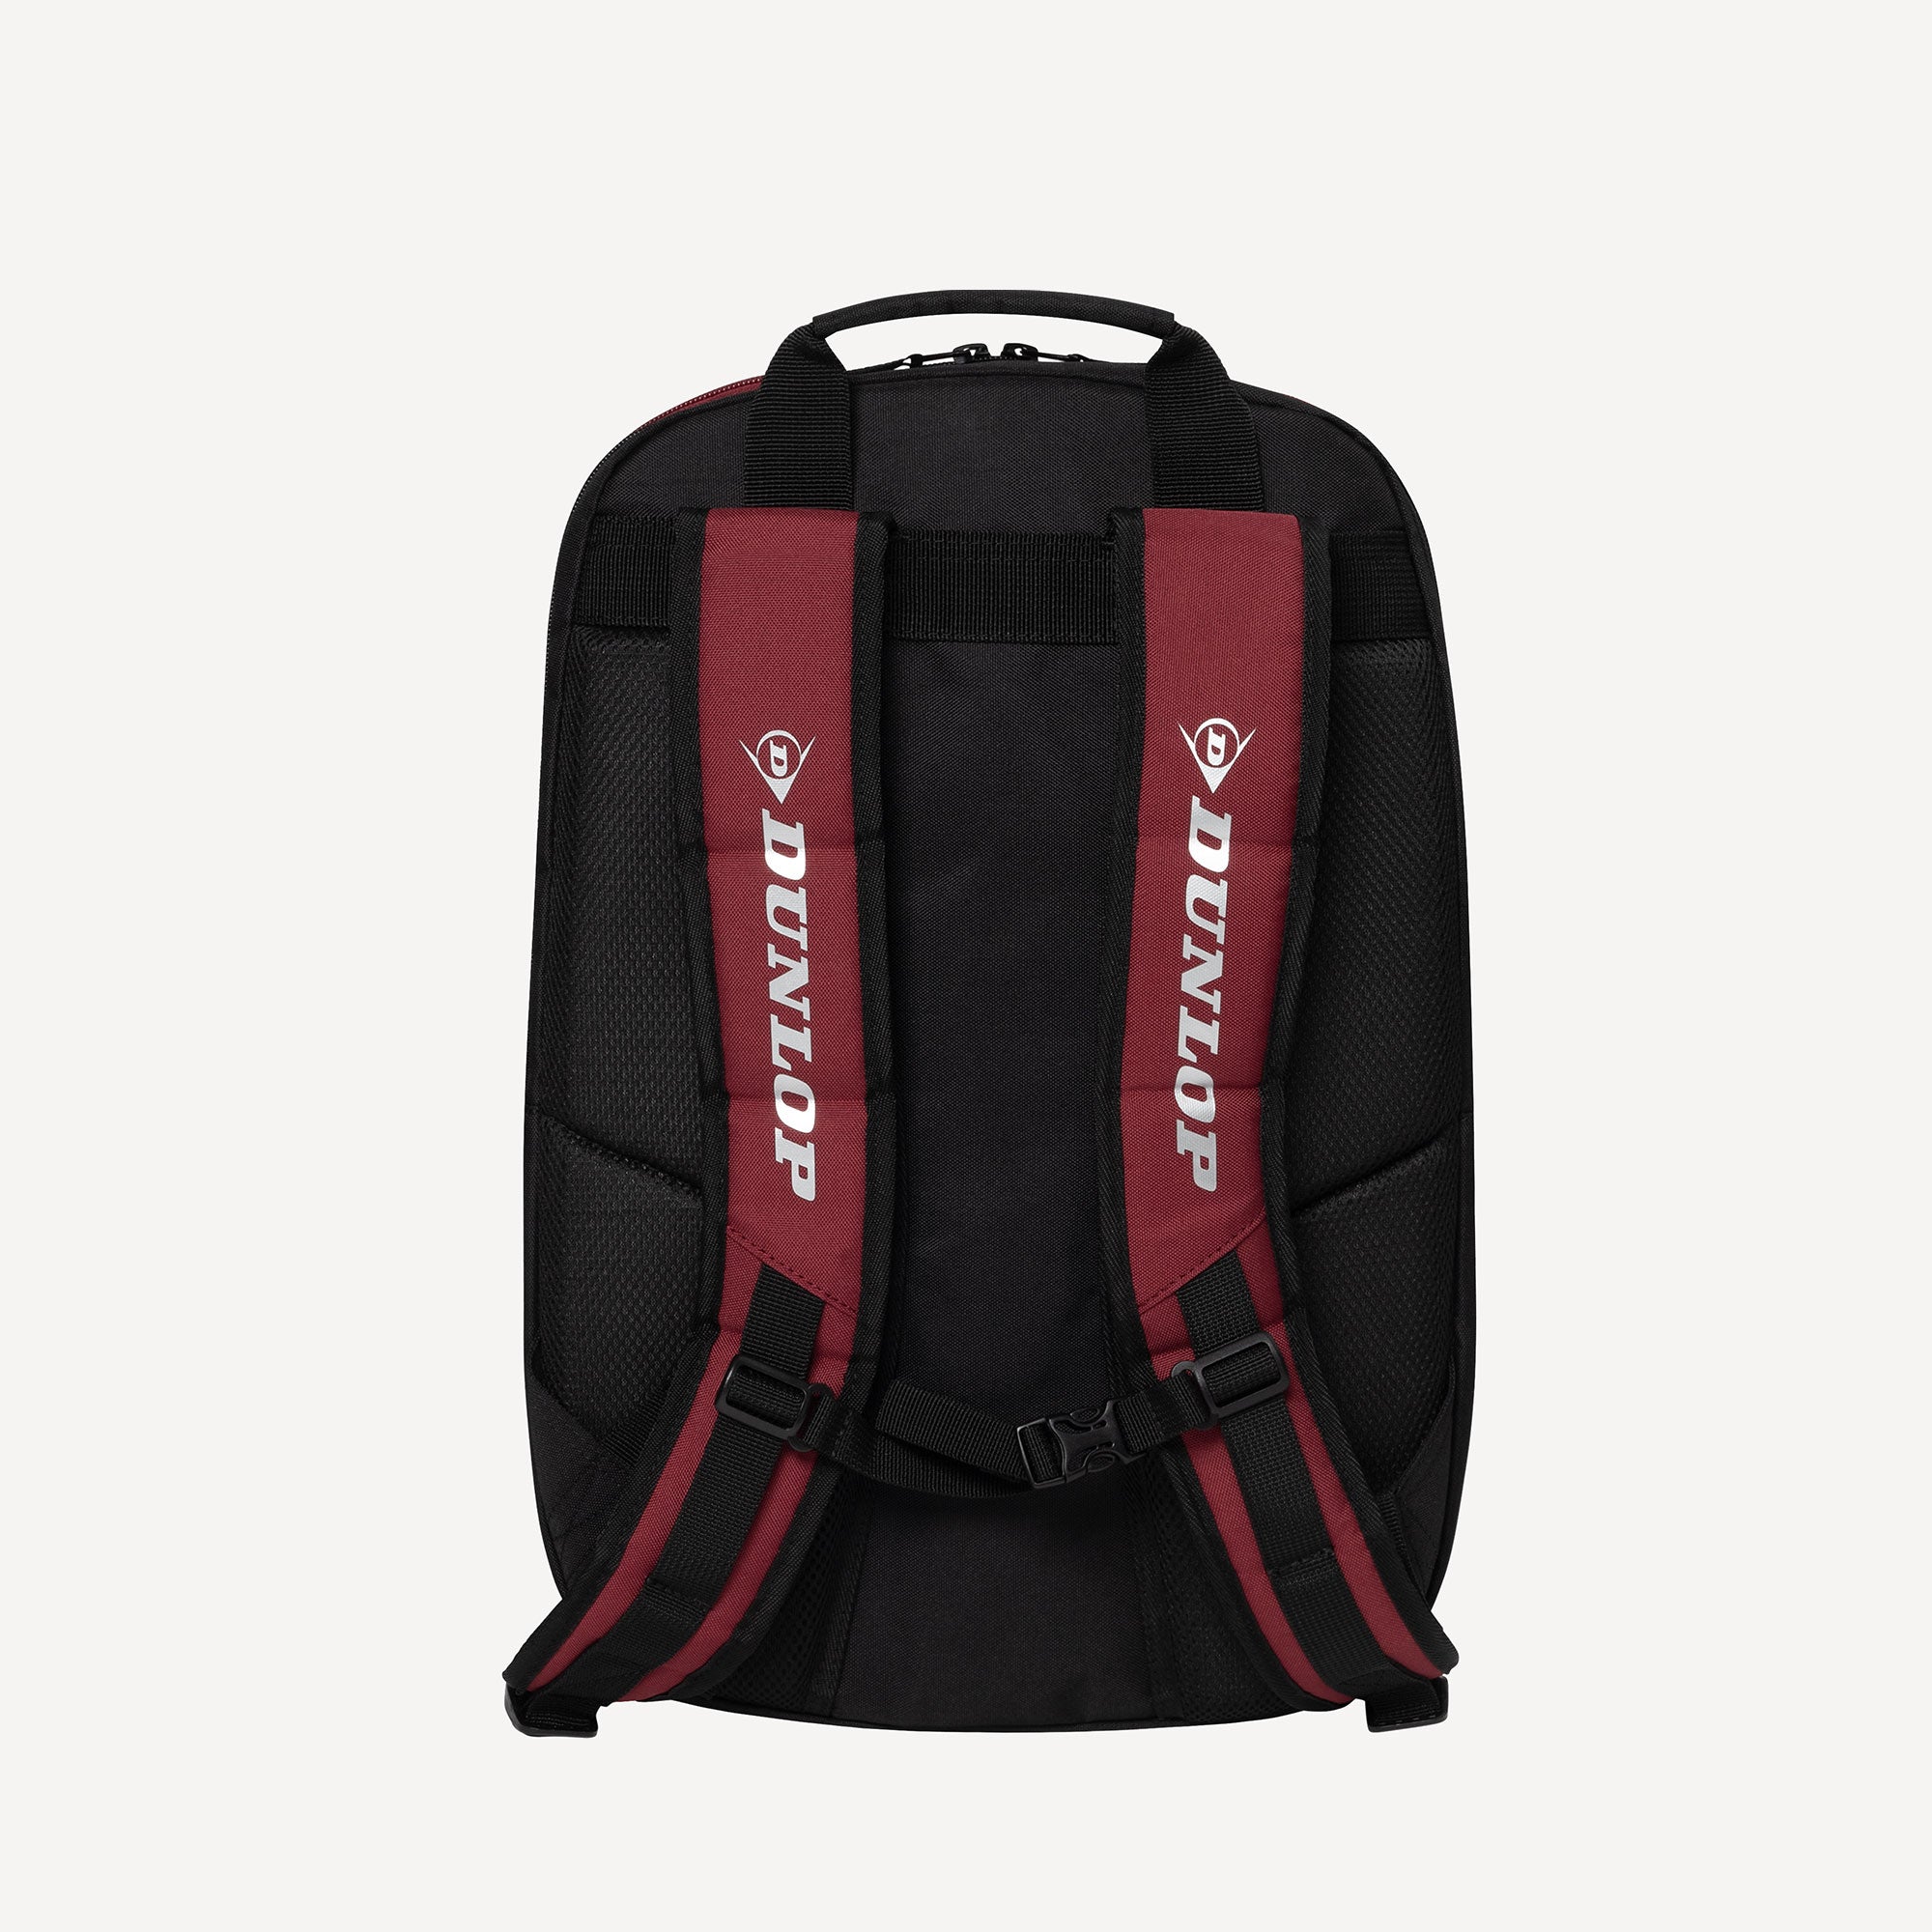 Dunlop CX Performance Tennis Backpack - Red (2)